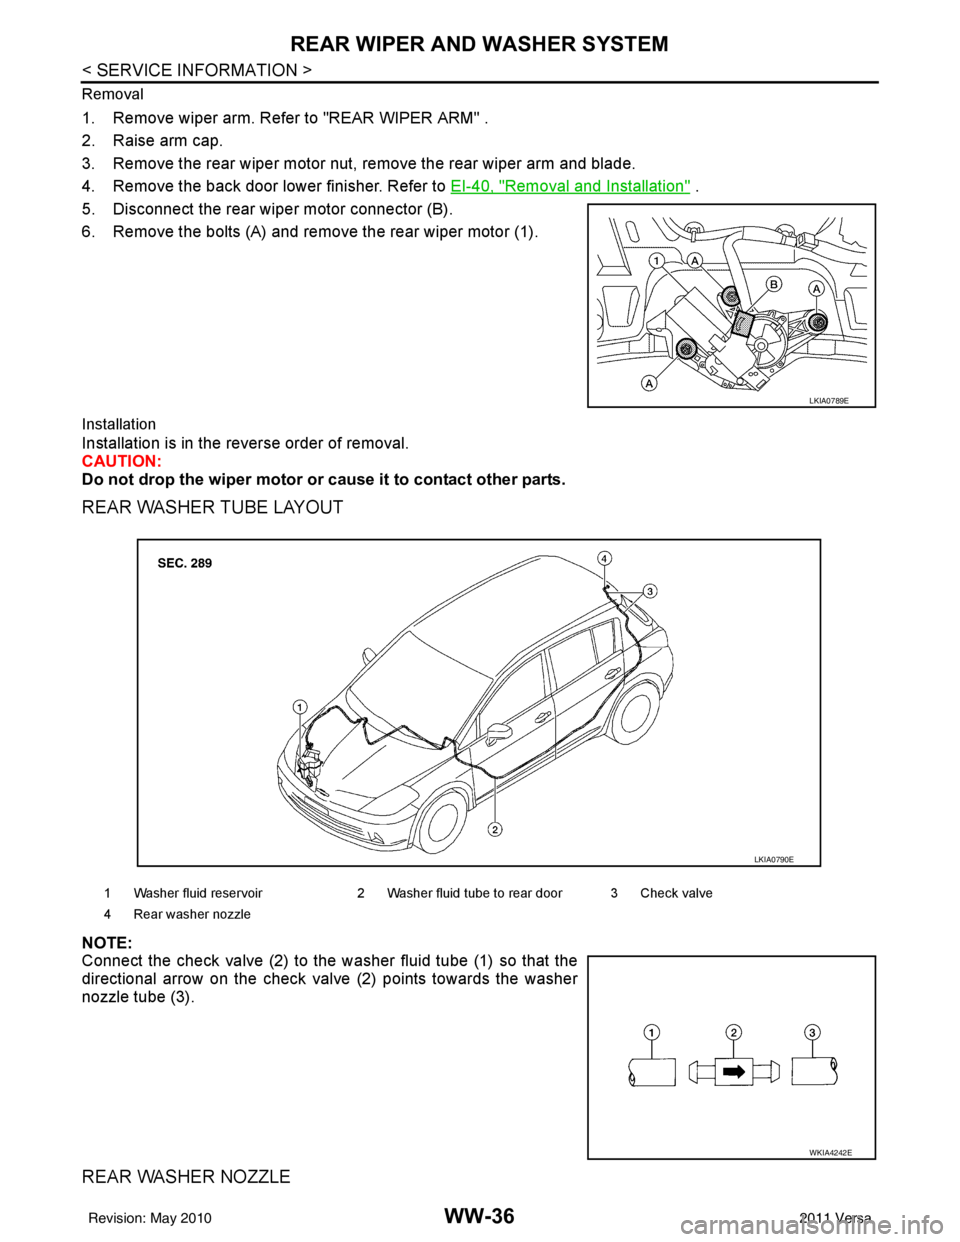 NISSAN LATIO 2011  Service Repair Manual WW-36
< SERVICE INFORMATION >
REAR WIPER AND WASHER SYSTEM
Removal
1. Remove wiper arm. Refer to "REAR WIPER ARM" .
2. Raise arm cap.
3. Remove the rear wiper motor nut, remove the rear wiper arm and 